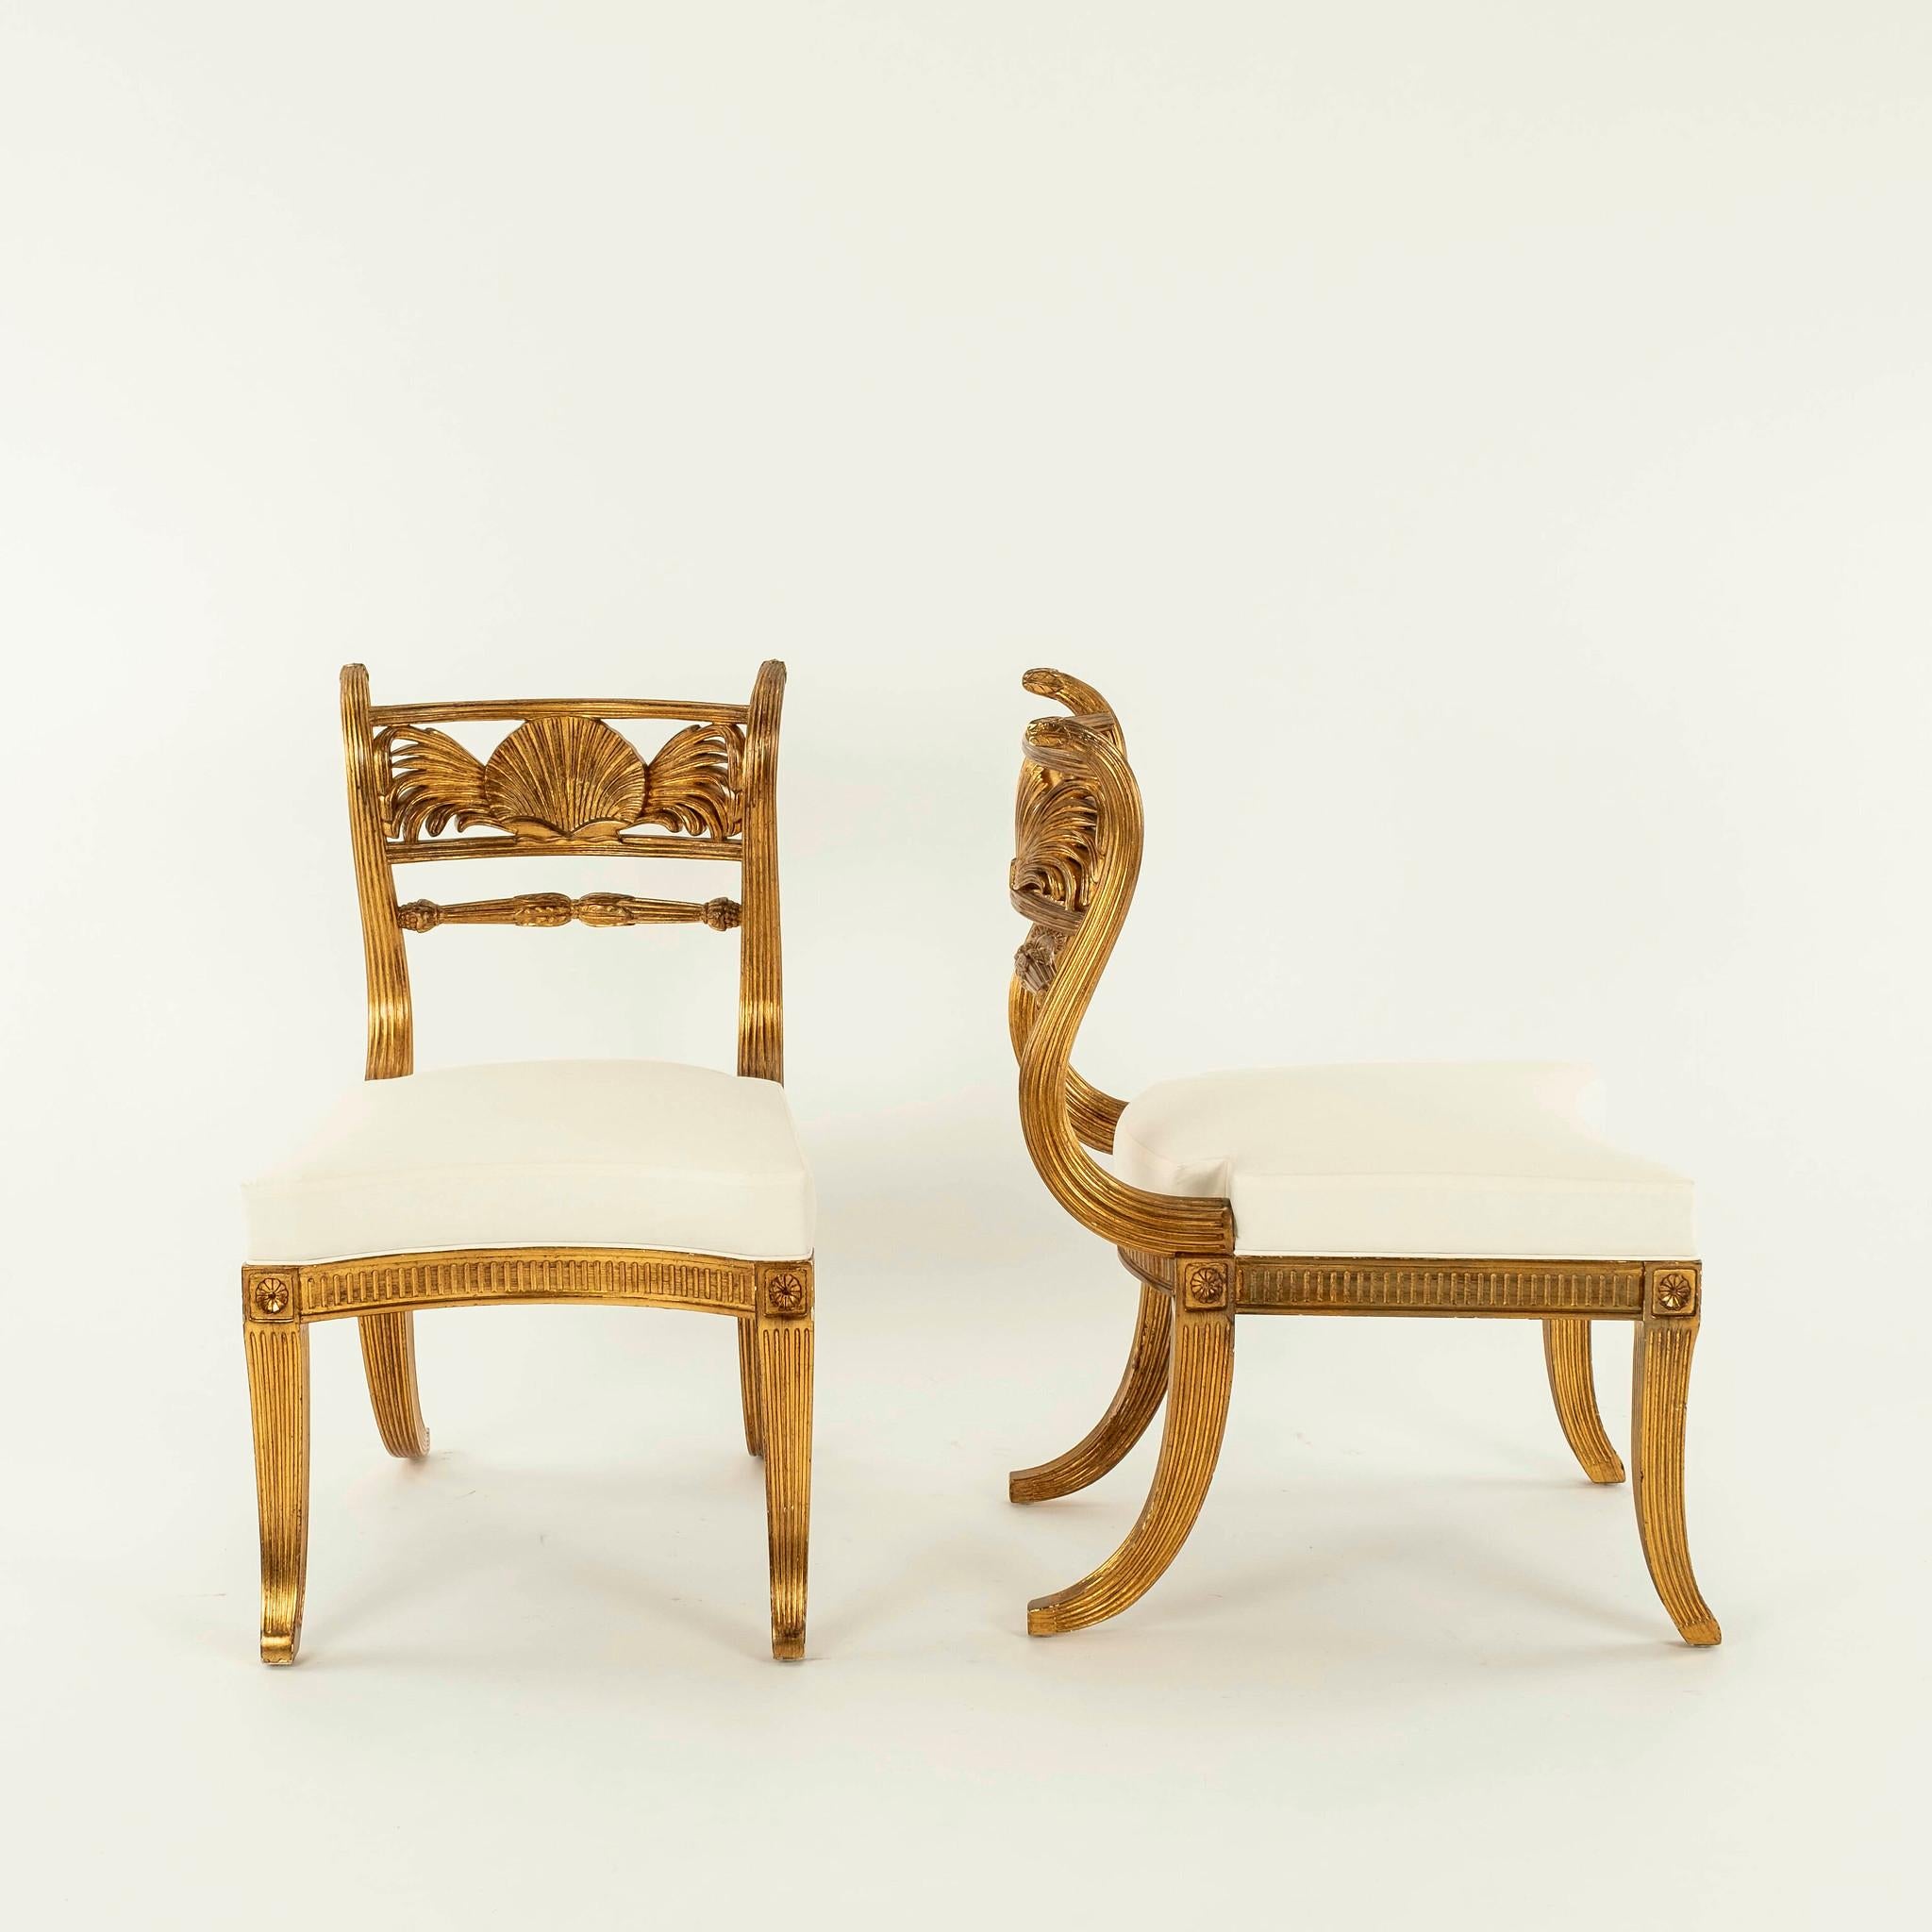 North American Pair of Rose Tarlow Style Regency Shell Back Chairs